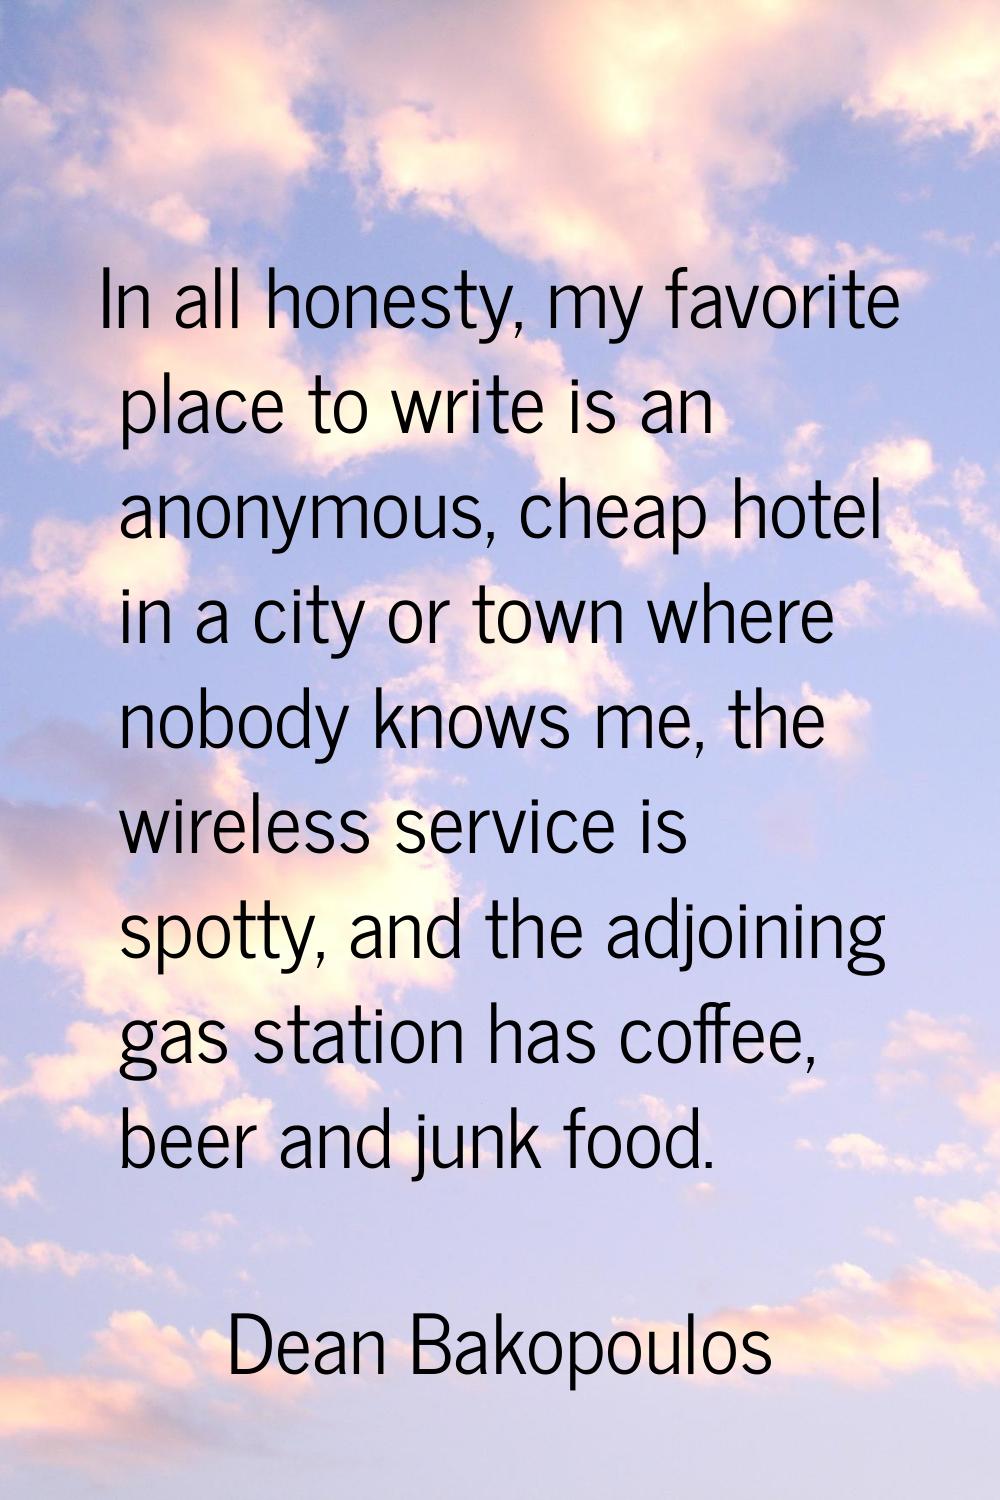 In all honesty, my favorite place to write is an anonymous, cheap hotel in a city or town where nob